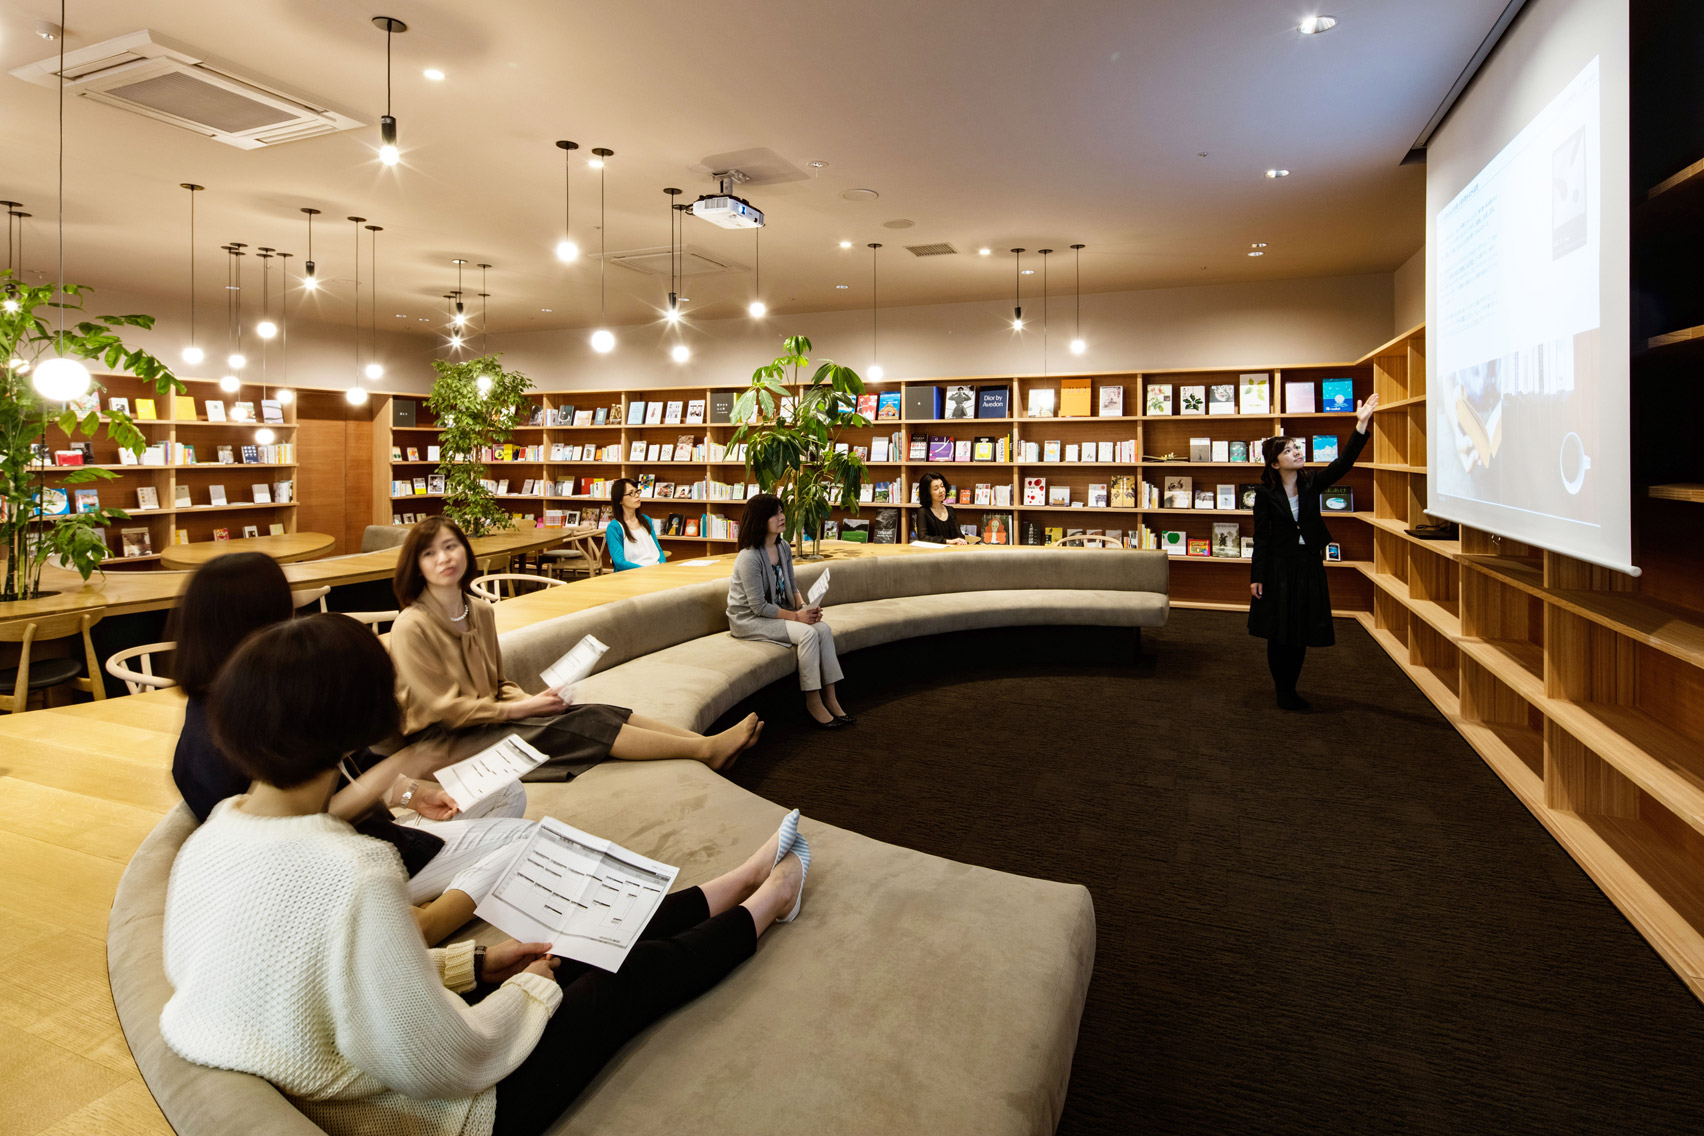 wil-womans-inspiration-library-japan-masa-architects-interiors_dezeen_1704_col_4